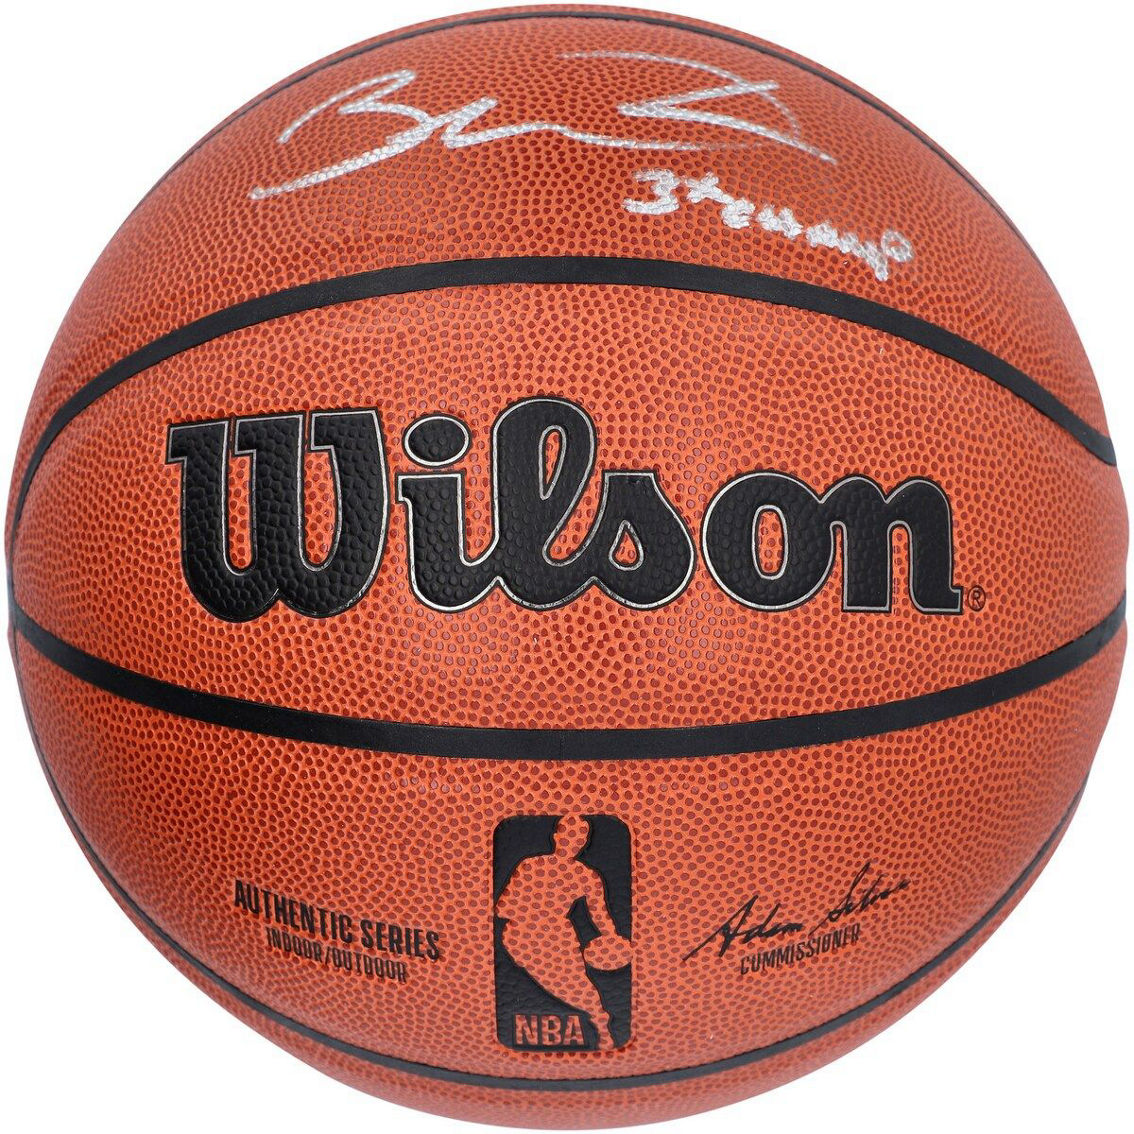 Fanatics Authentic Dwyane Wade Miami Heat Autographed Wilson Authentic Series Indoor/Outdoor Basketball with ''3X NBA CHAMP'' Inscription - Image 3 of 3